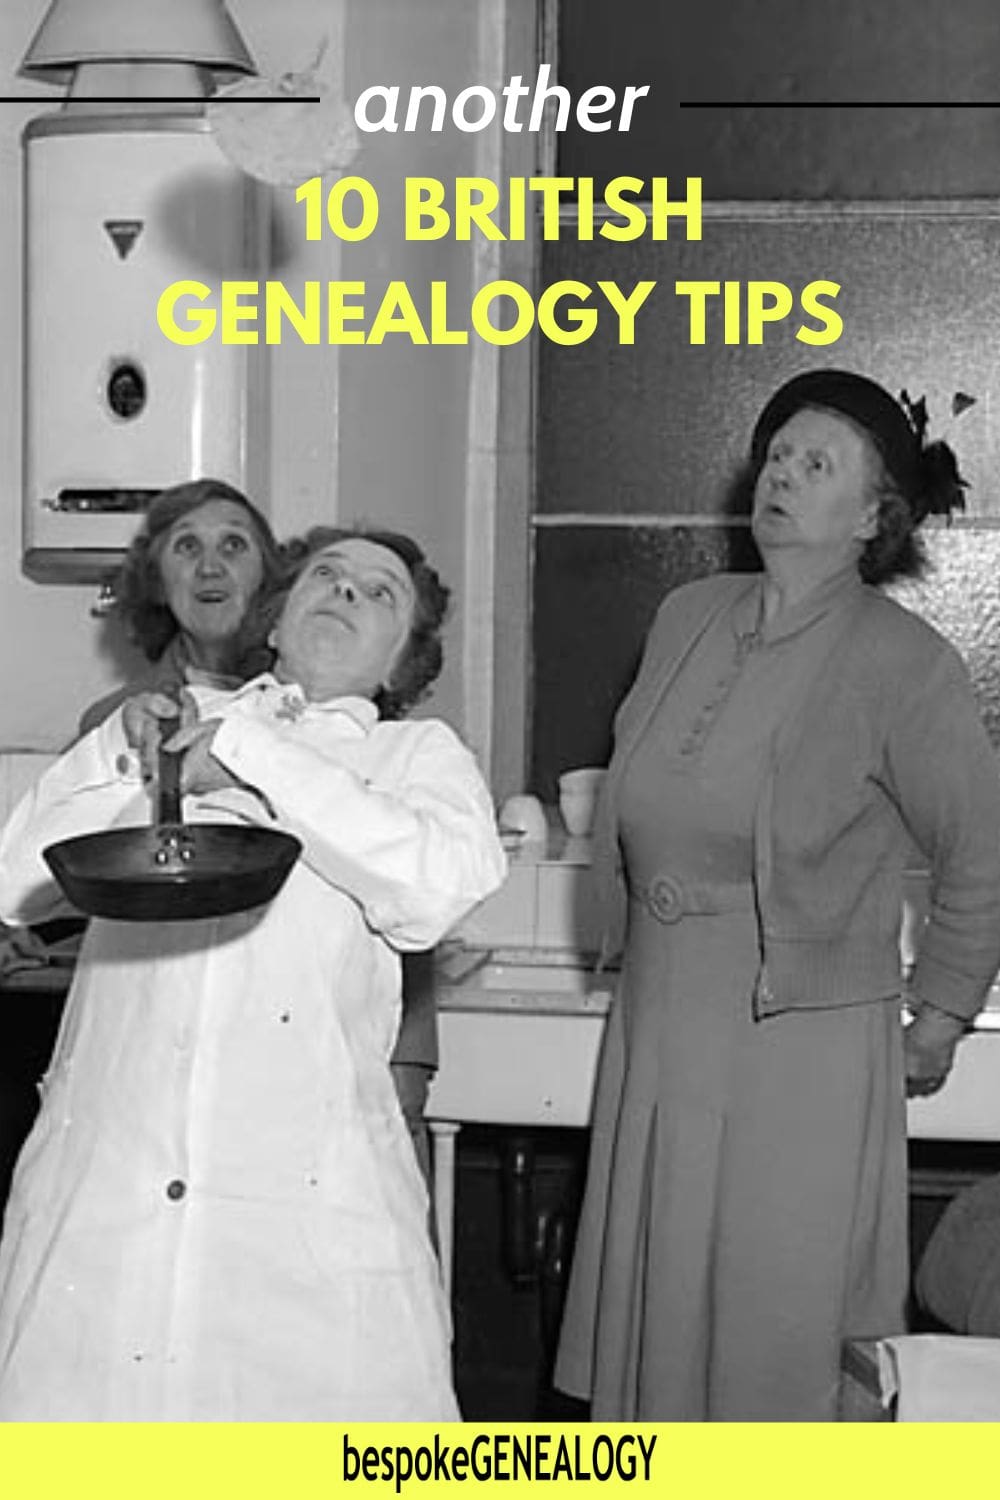 Pinterest pin with a vintage picture of a woman tossing a pancake. Another 10 British genealogy tips